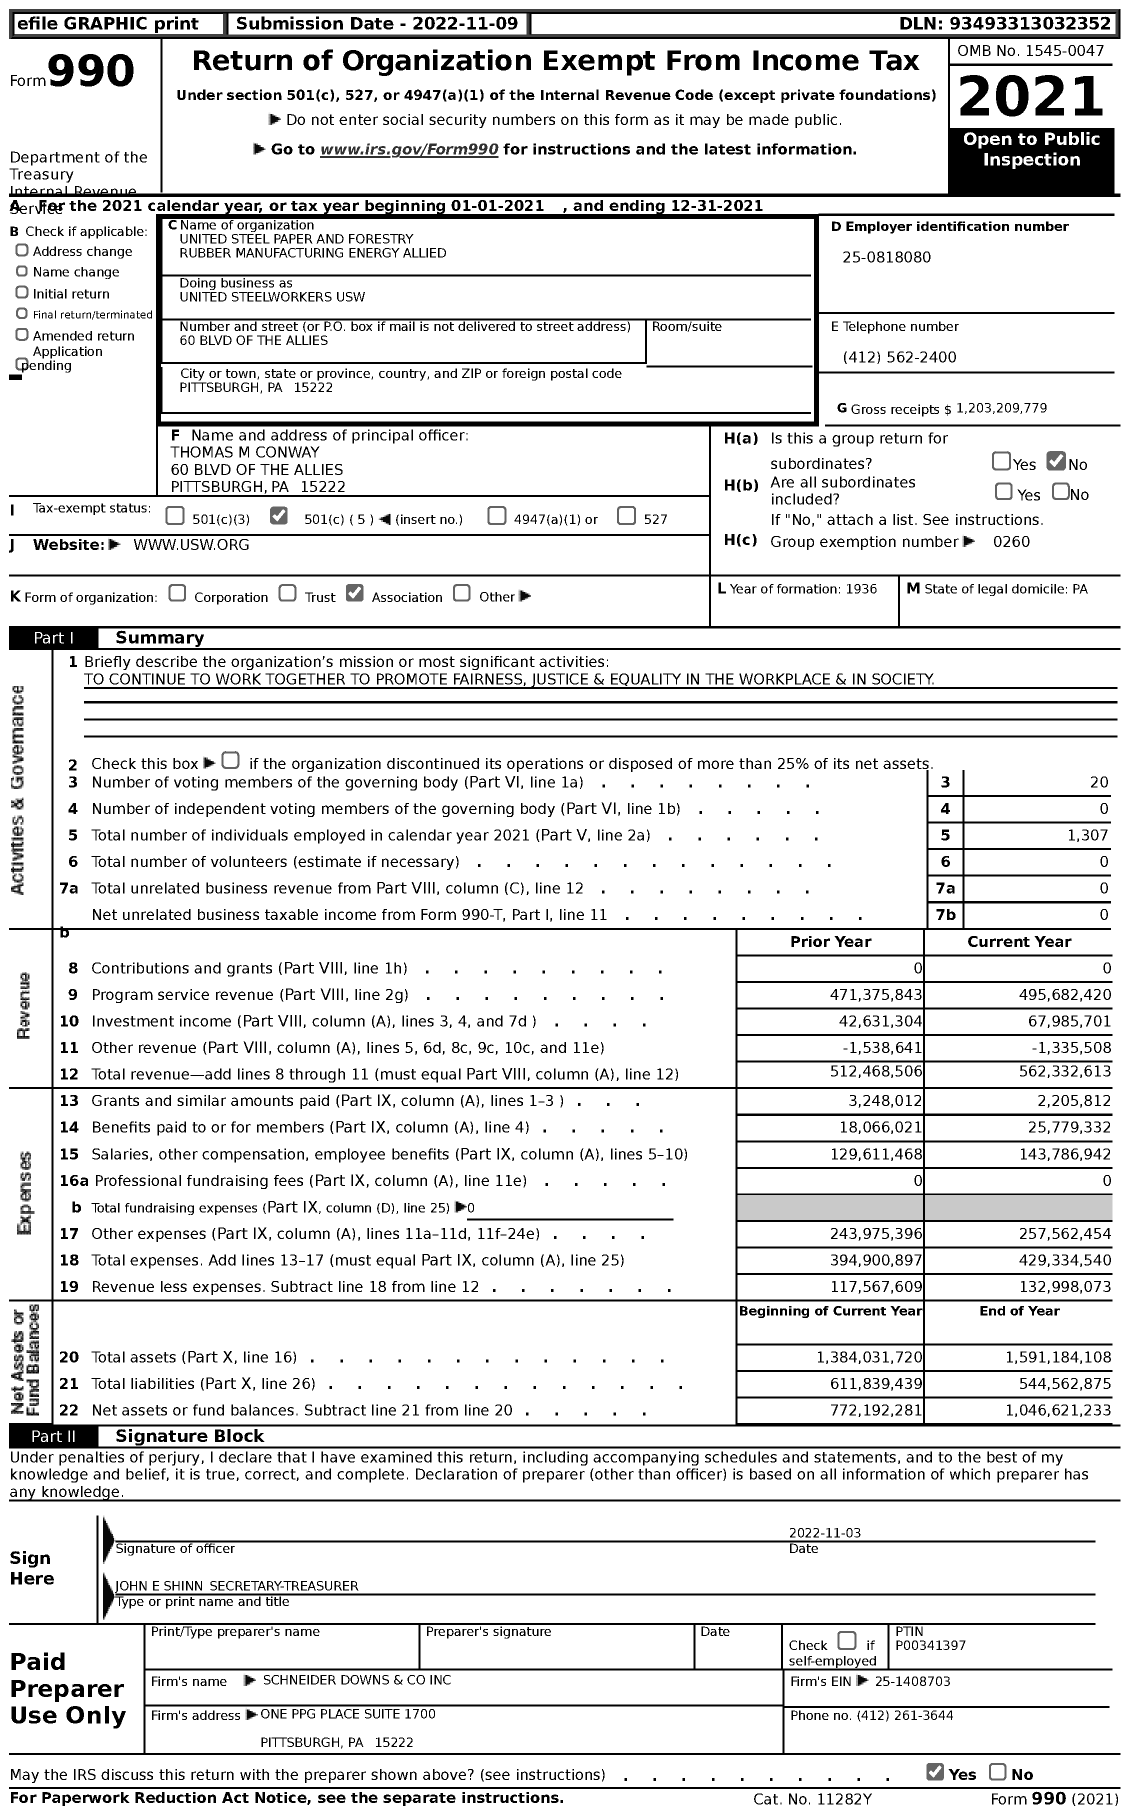 Image of first page of 2021 Form 990 for United Steelworkers USW